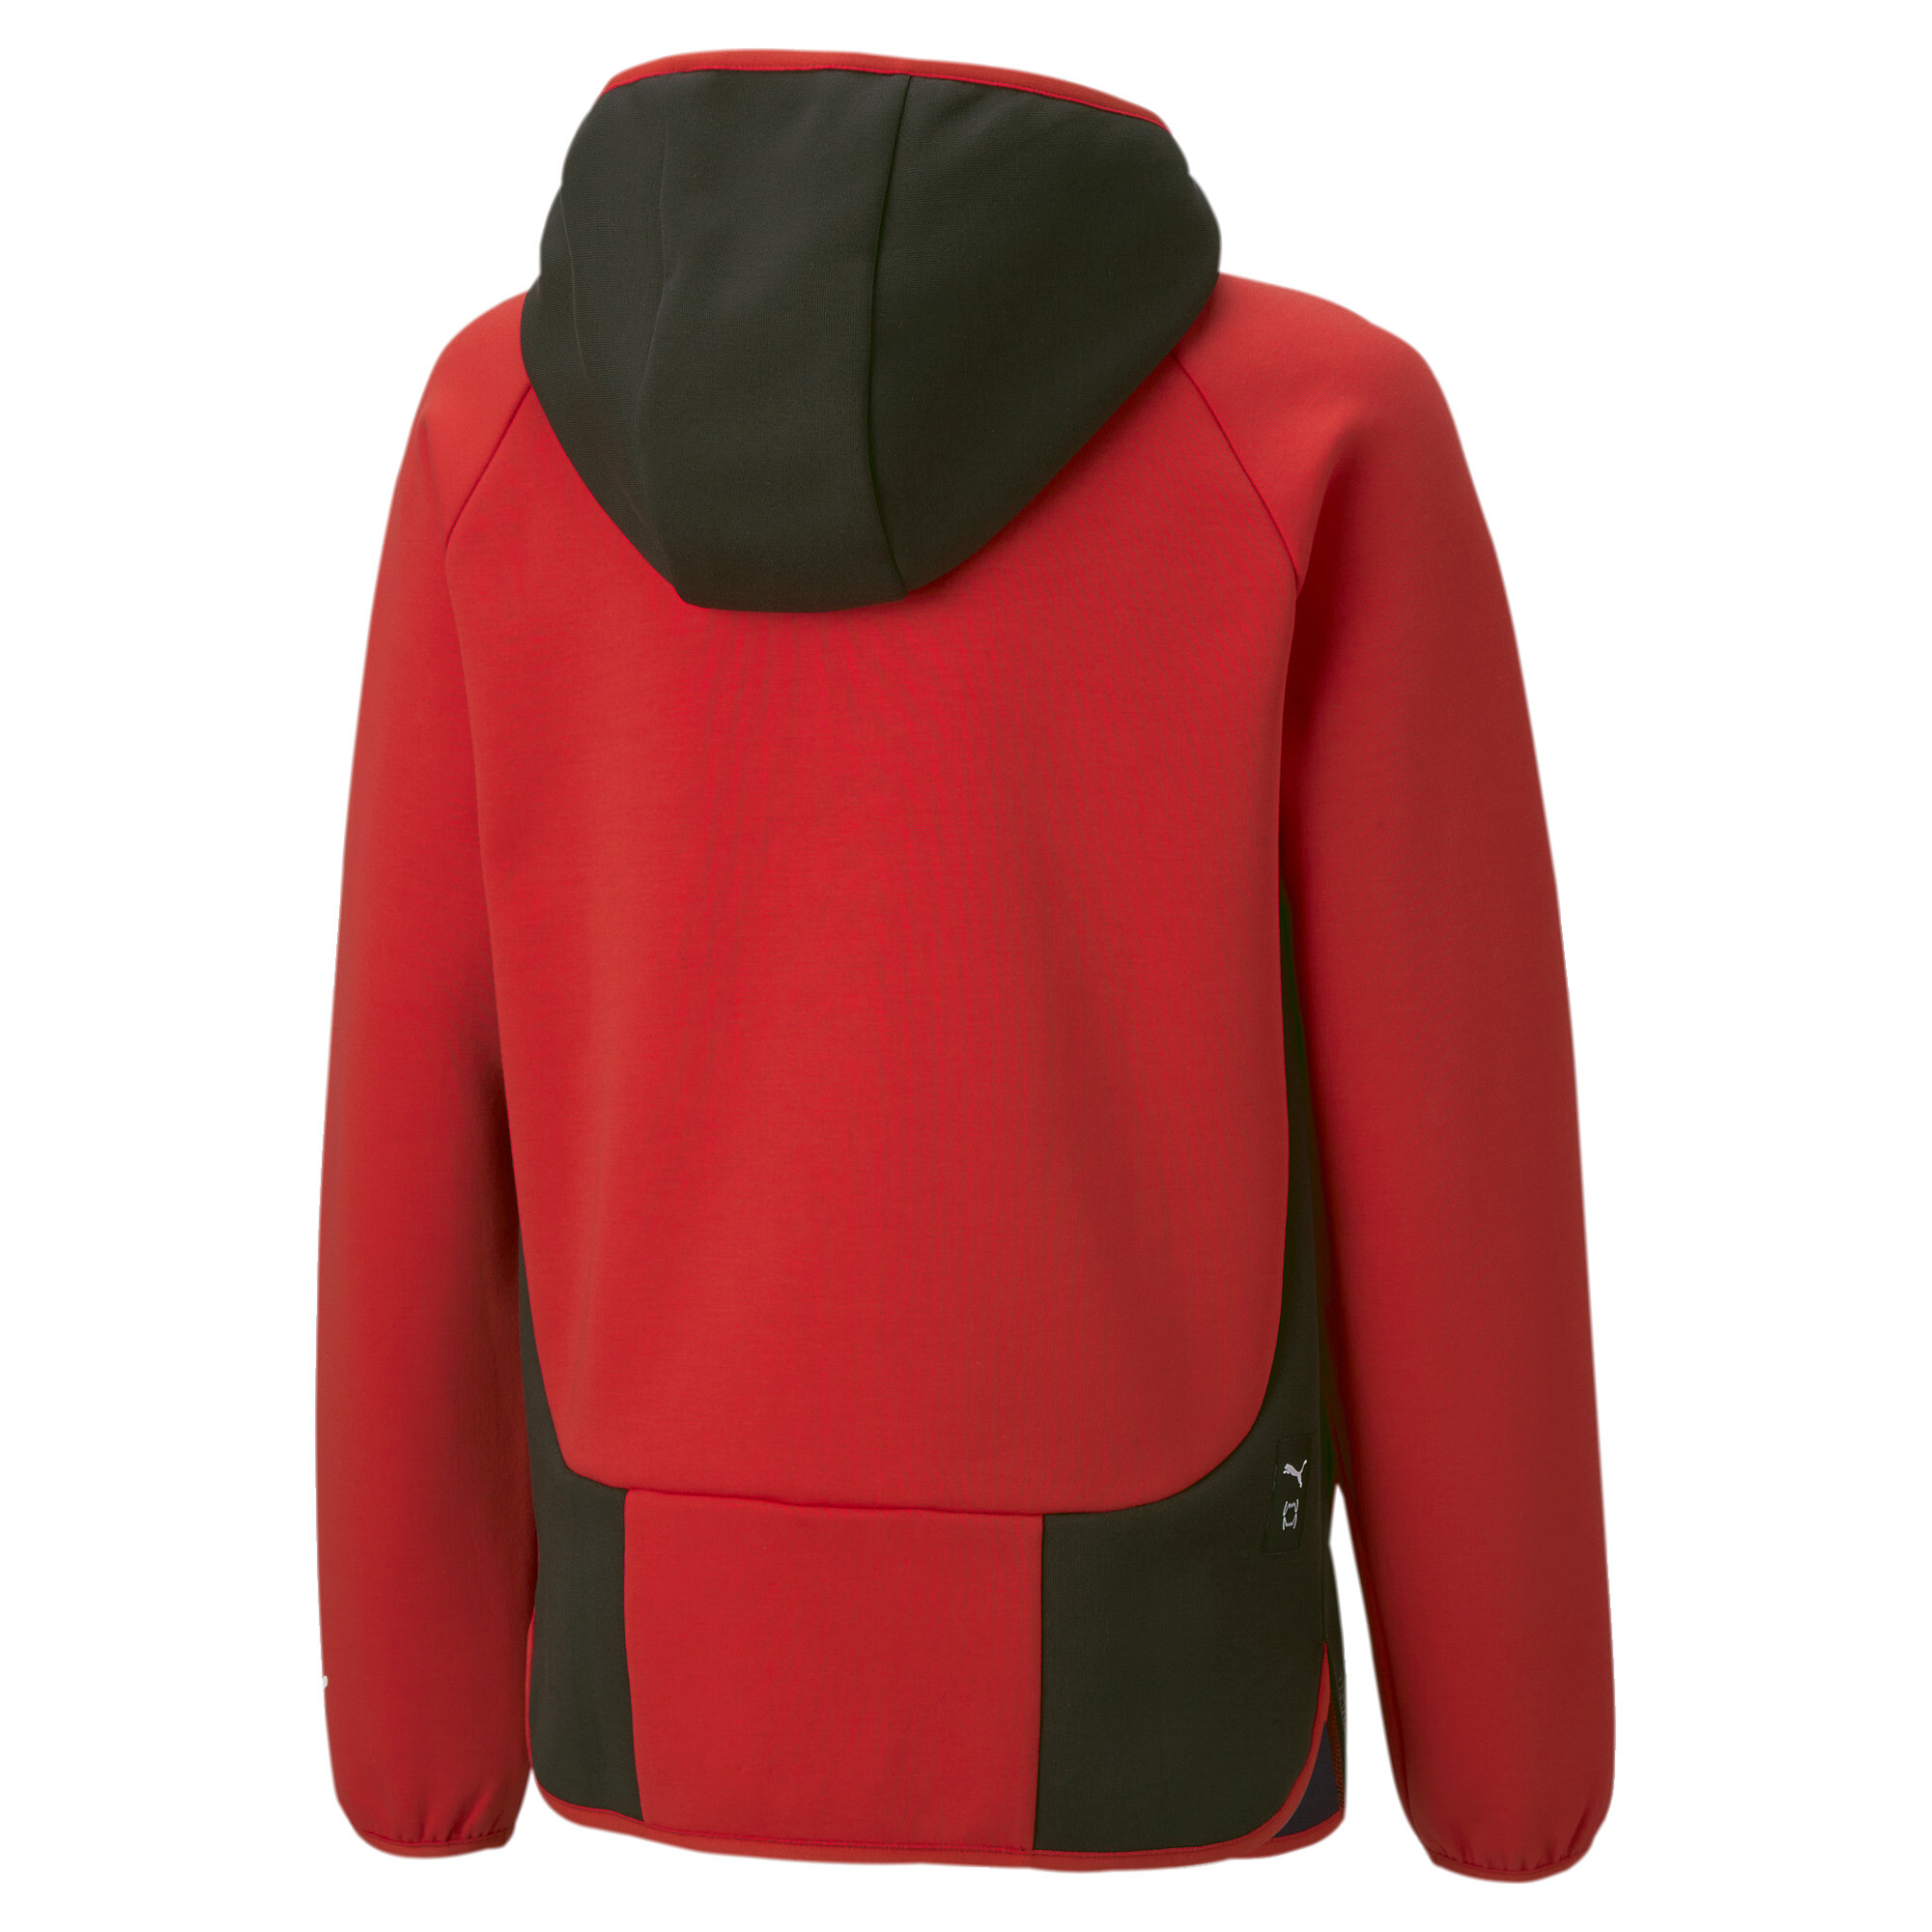 PUMA X MELO Dime Jacket In Red, Size 9-10 Youth